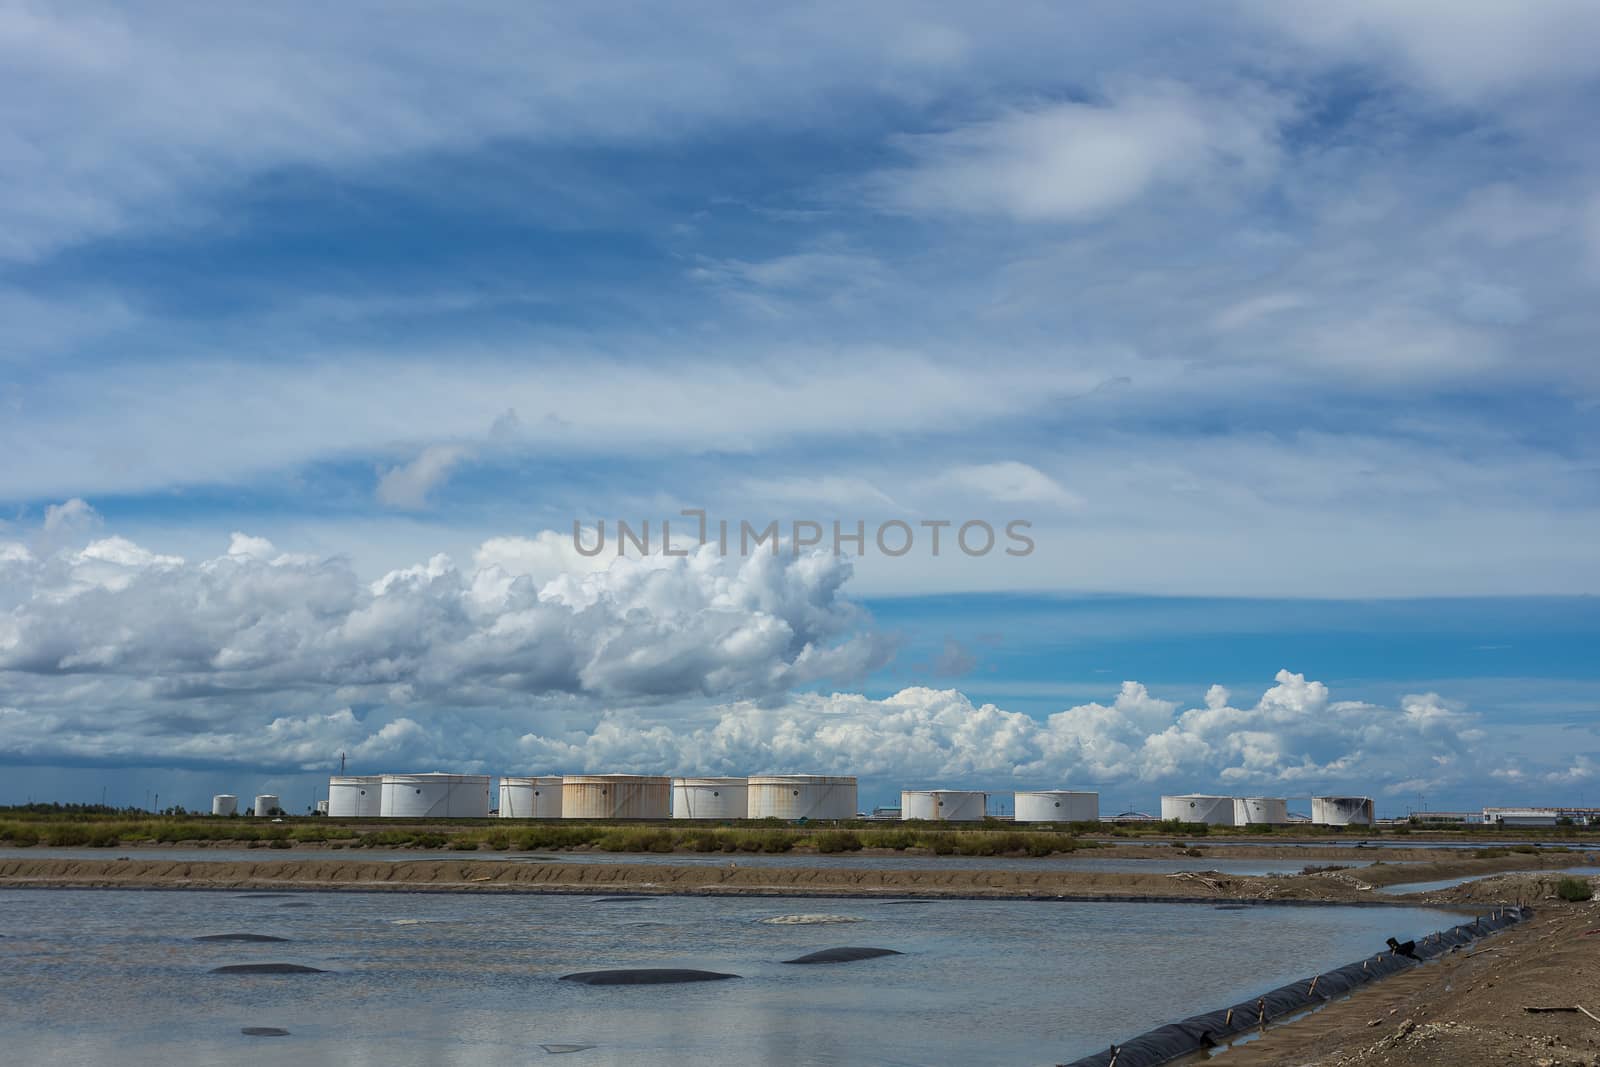 Oil tanks in a row under blue sky, Large white industrial tank f by kaiskynet